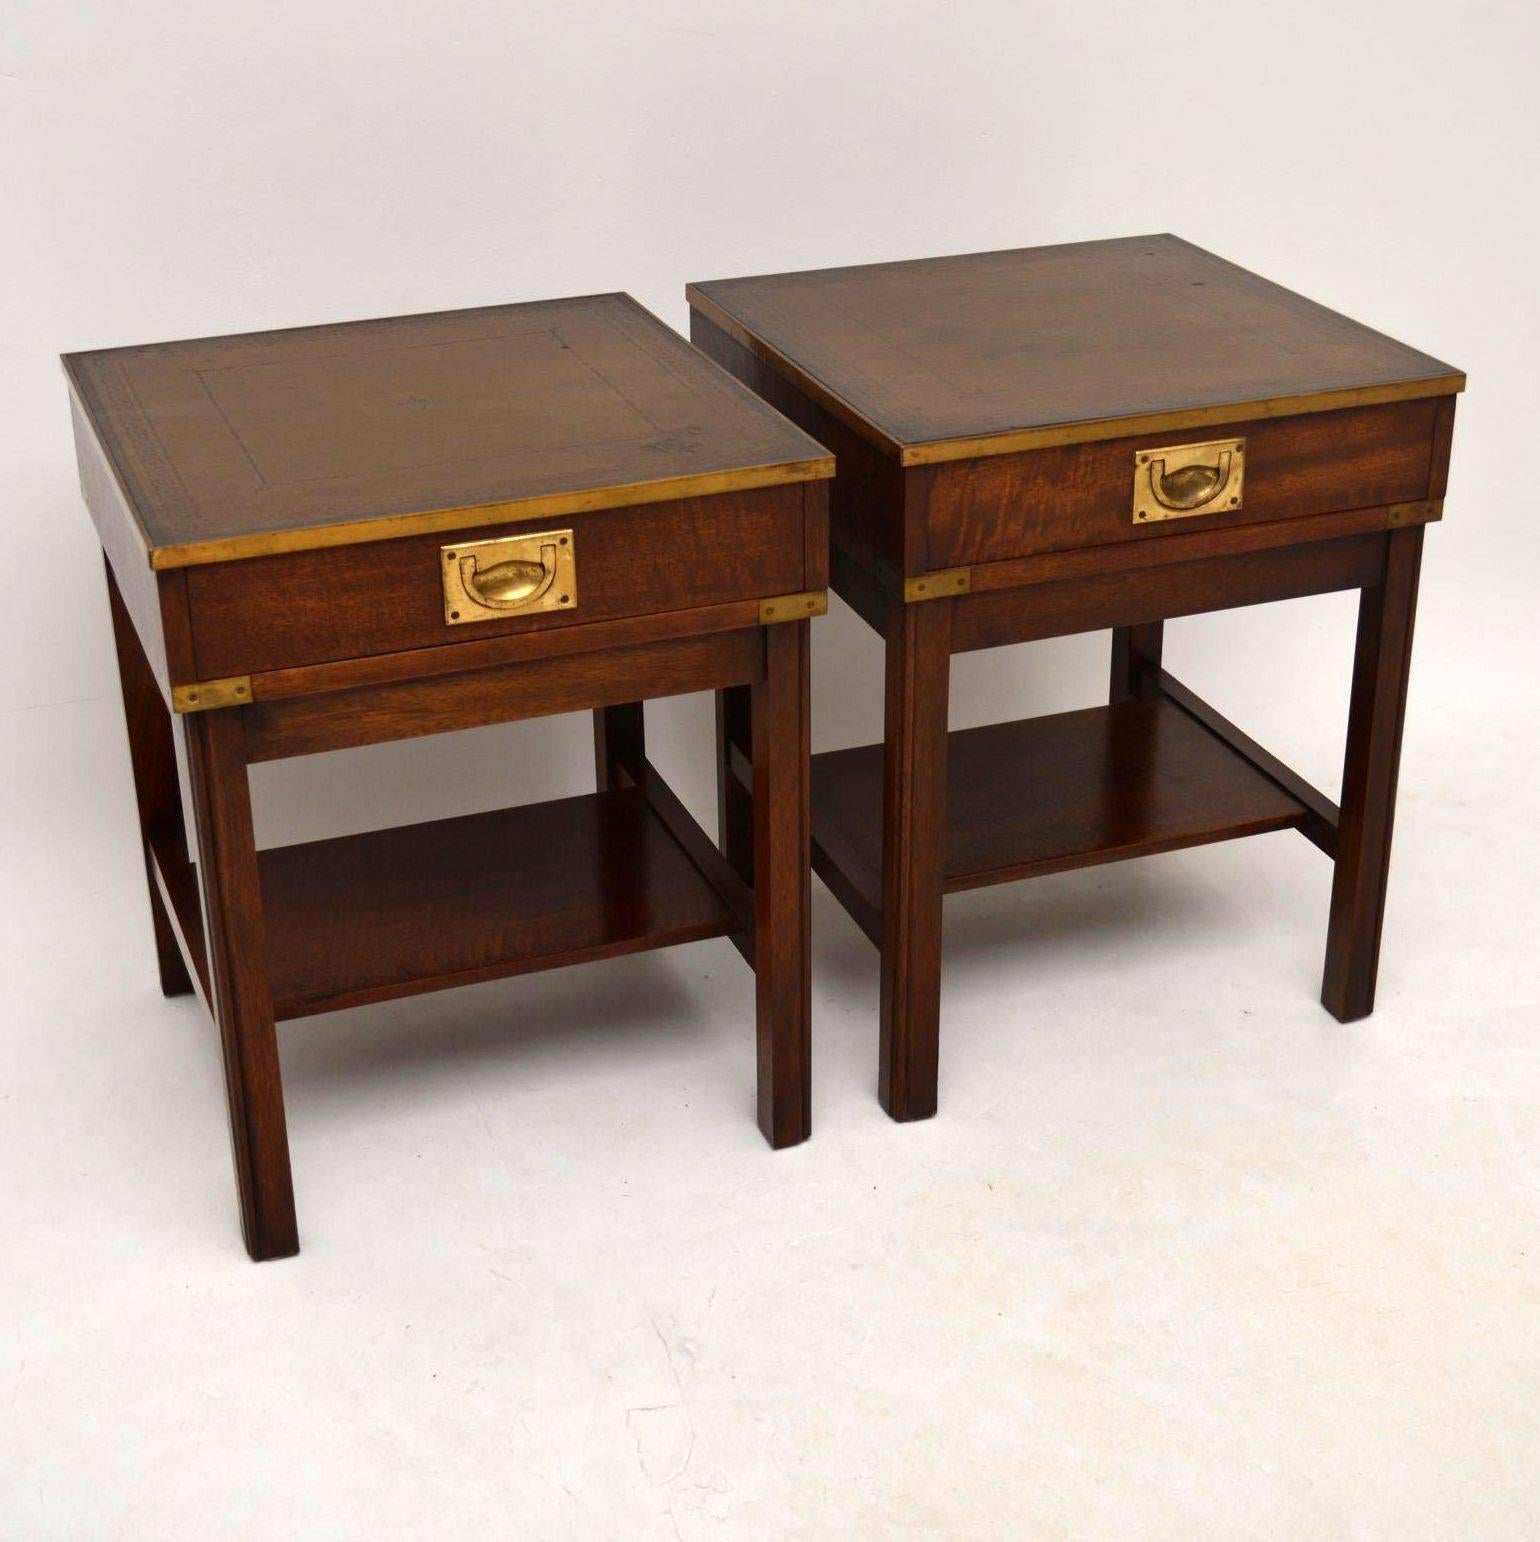 Great looking pair of mahogany side tables or even bedside tables, dating circa 1930s-1950s period. They are antique Campaign style with brass top edges, brass corners and sunken brass military handles. The brass is naturally aged, the backs are